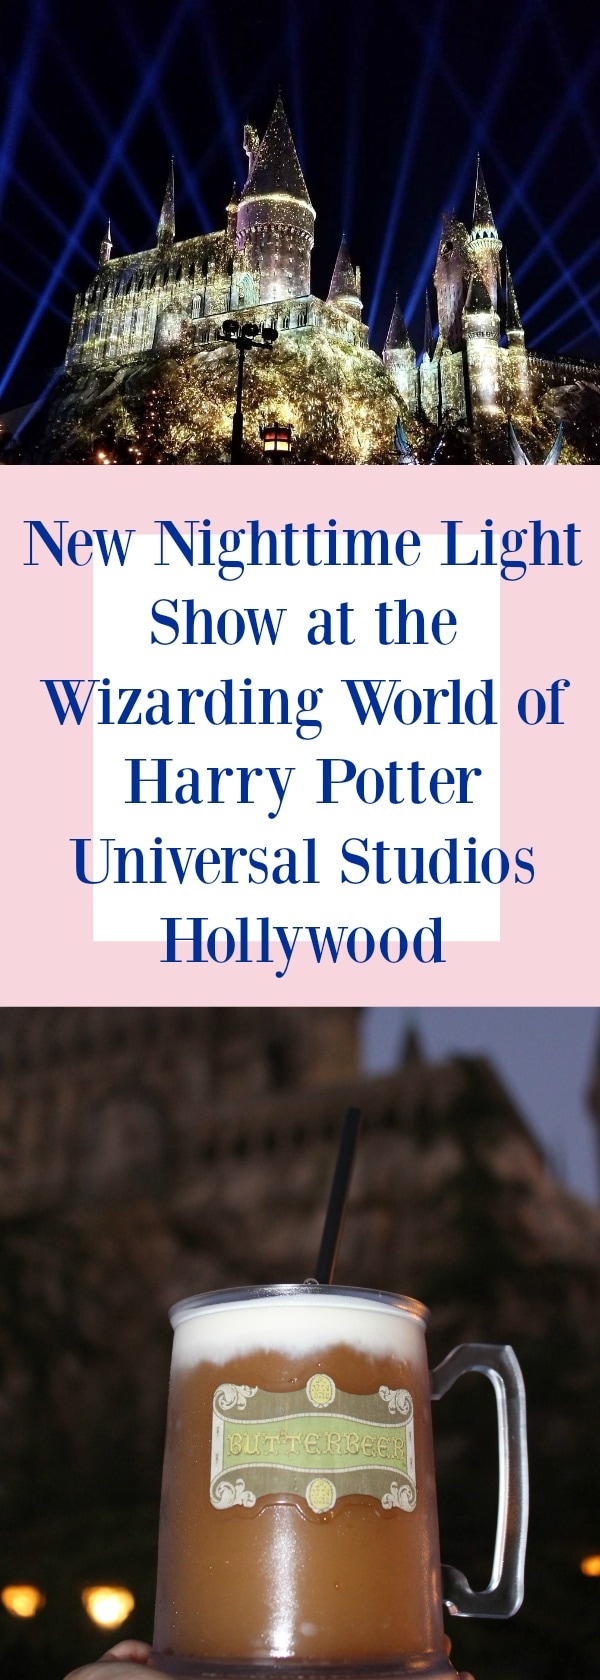 New Nighttime Light Show at the Wizarding World of Harry Potter Universal Studios Hollywood